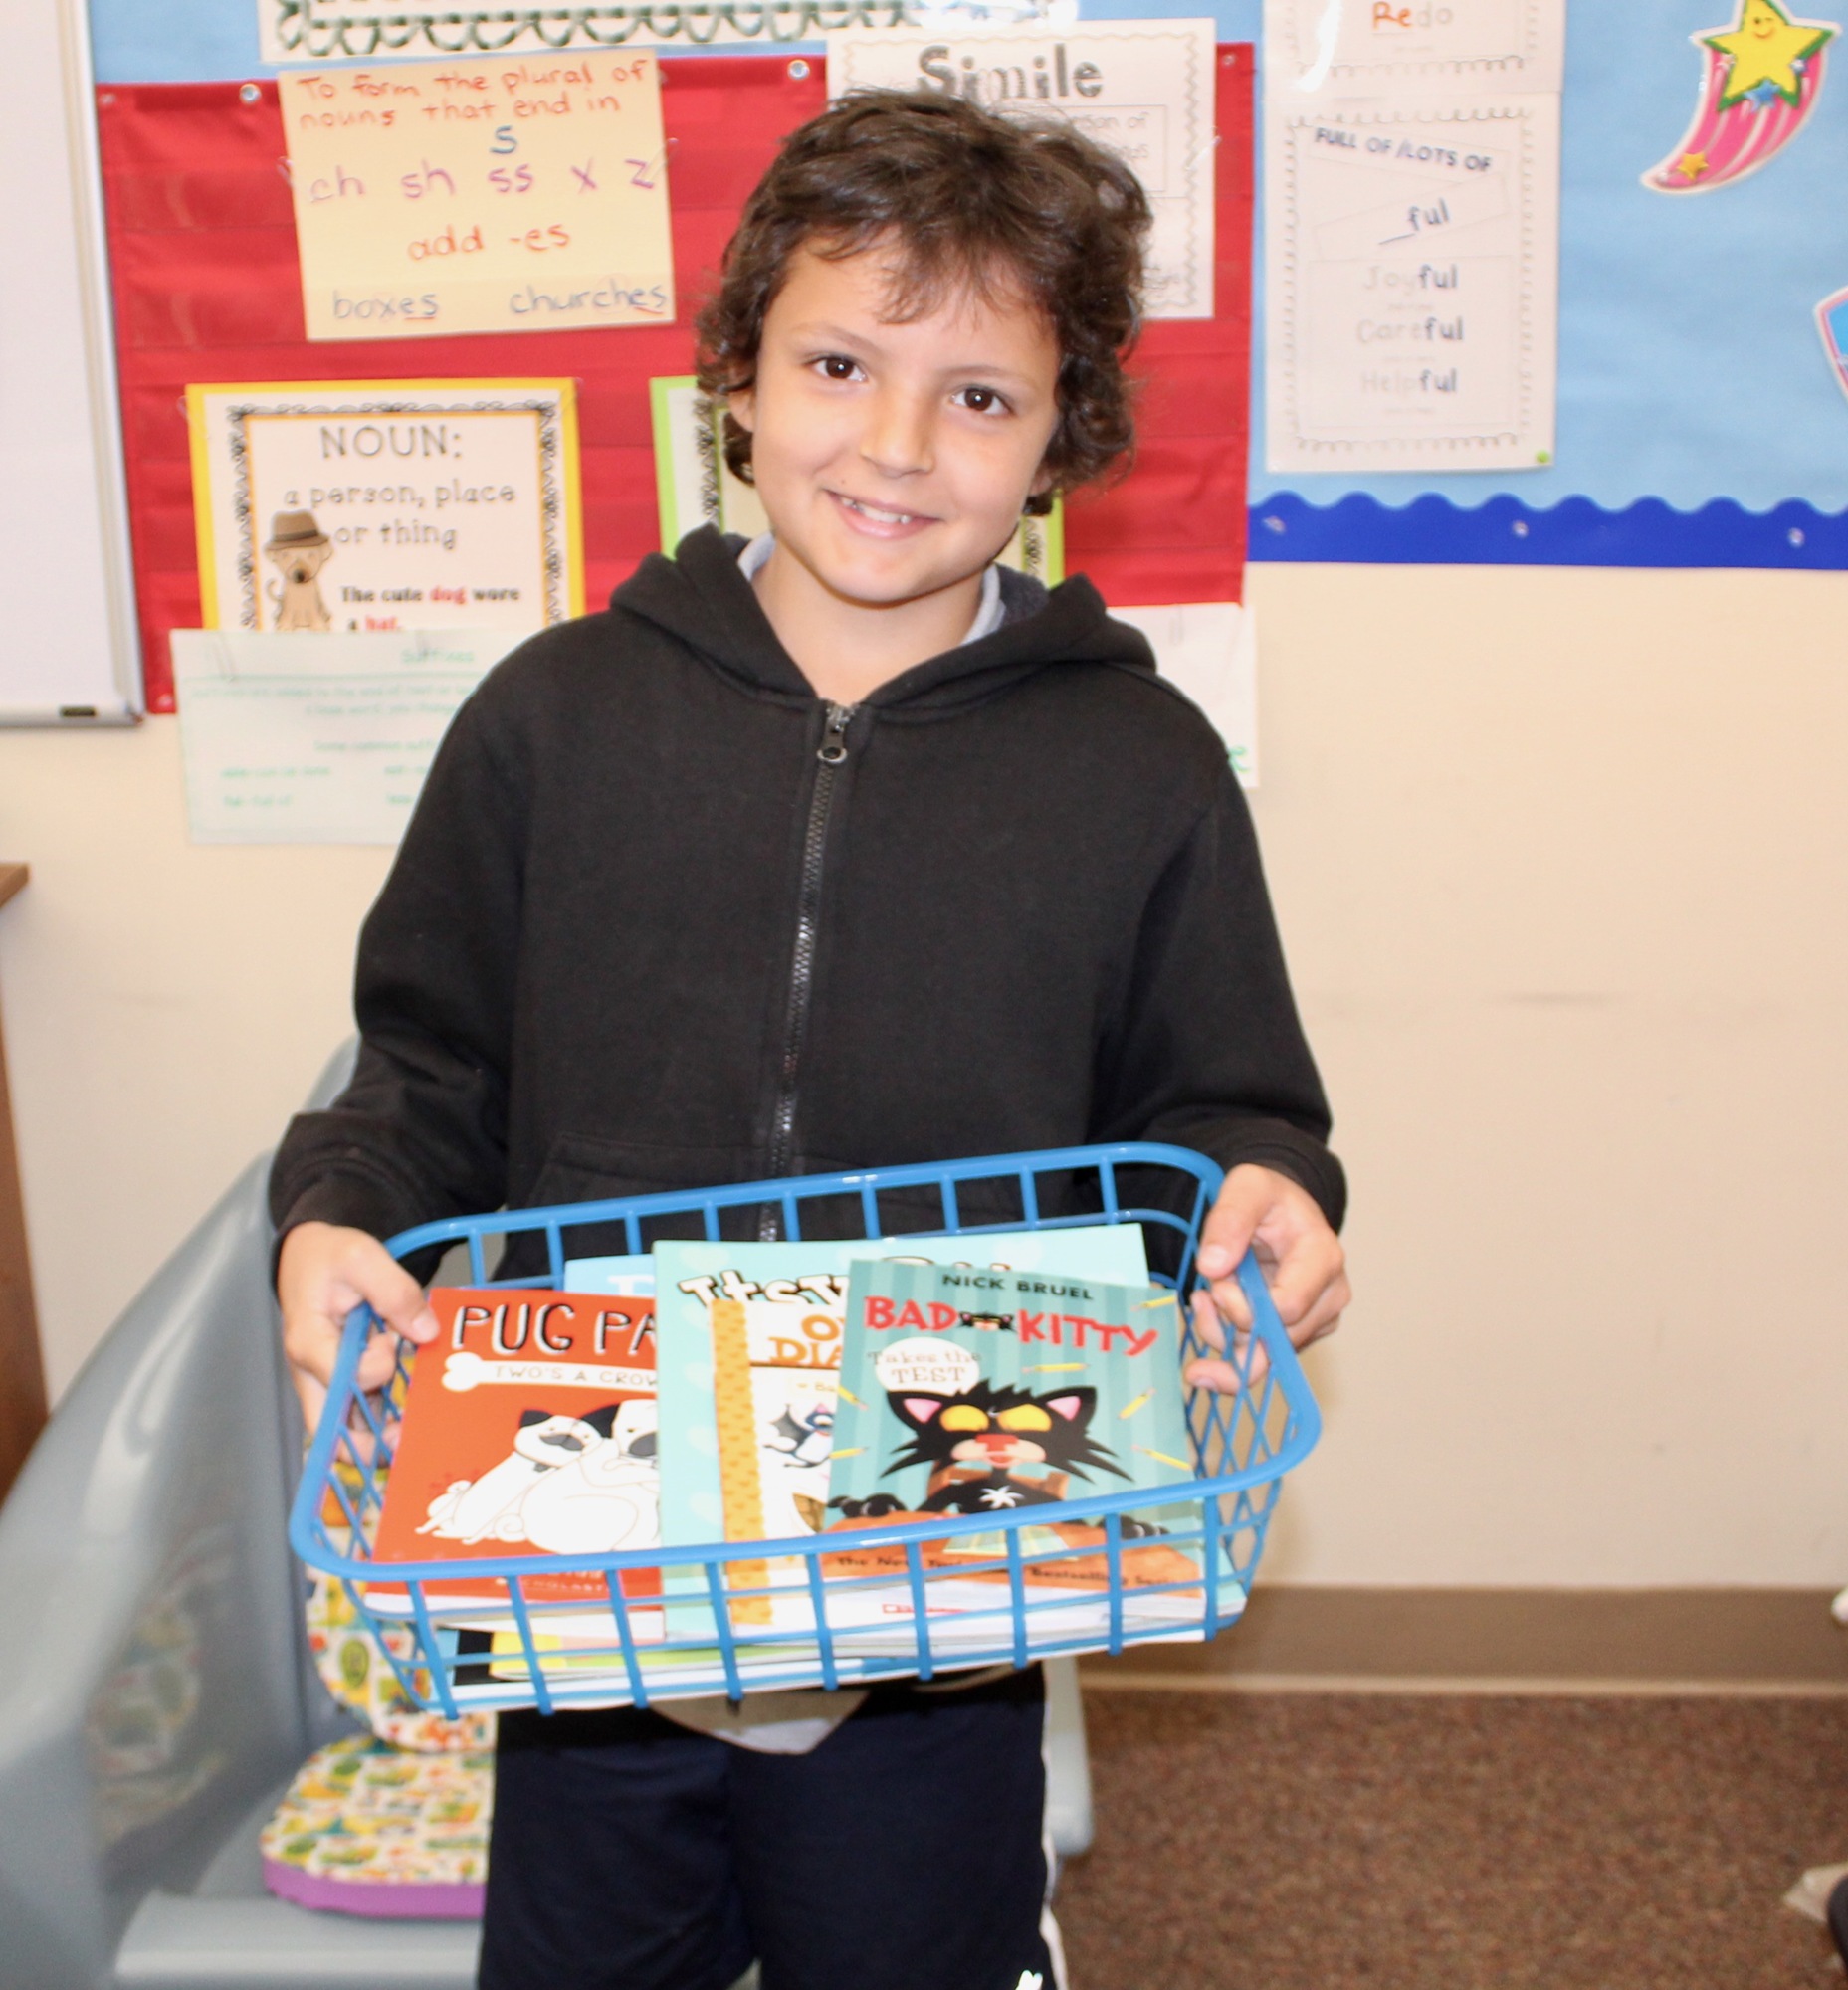 Rymfire second-grader Caleb Hether poses with a basket of Scholastic books he won. Photo courtesy Melanie Tahan